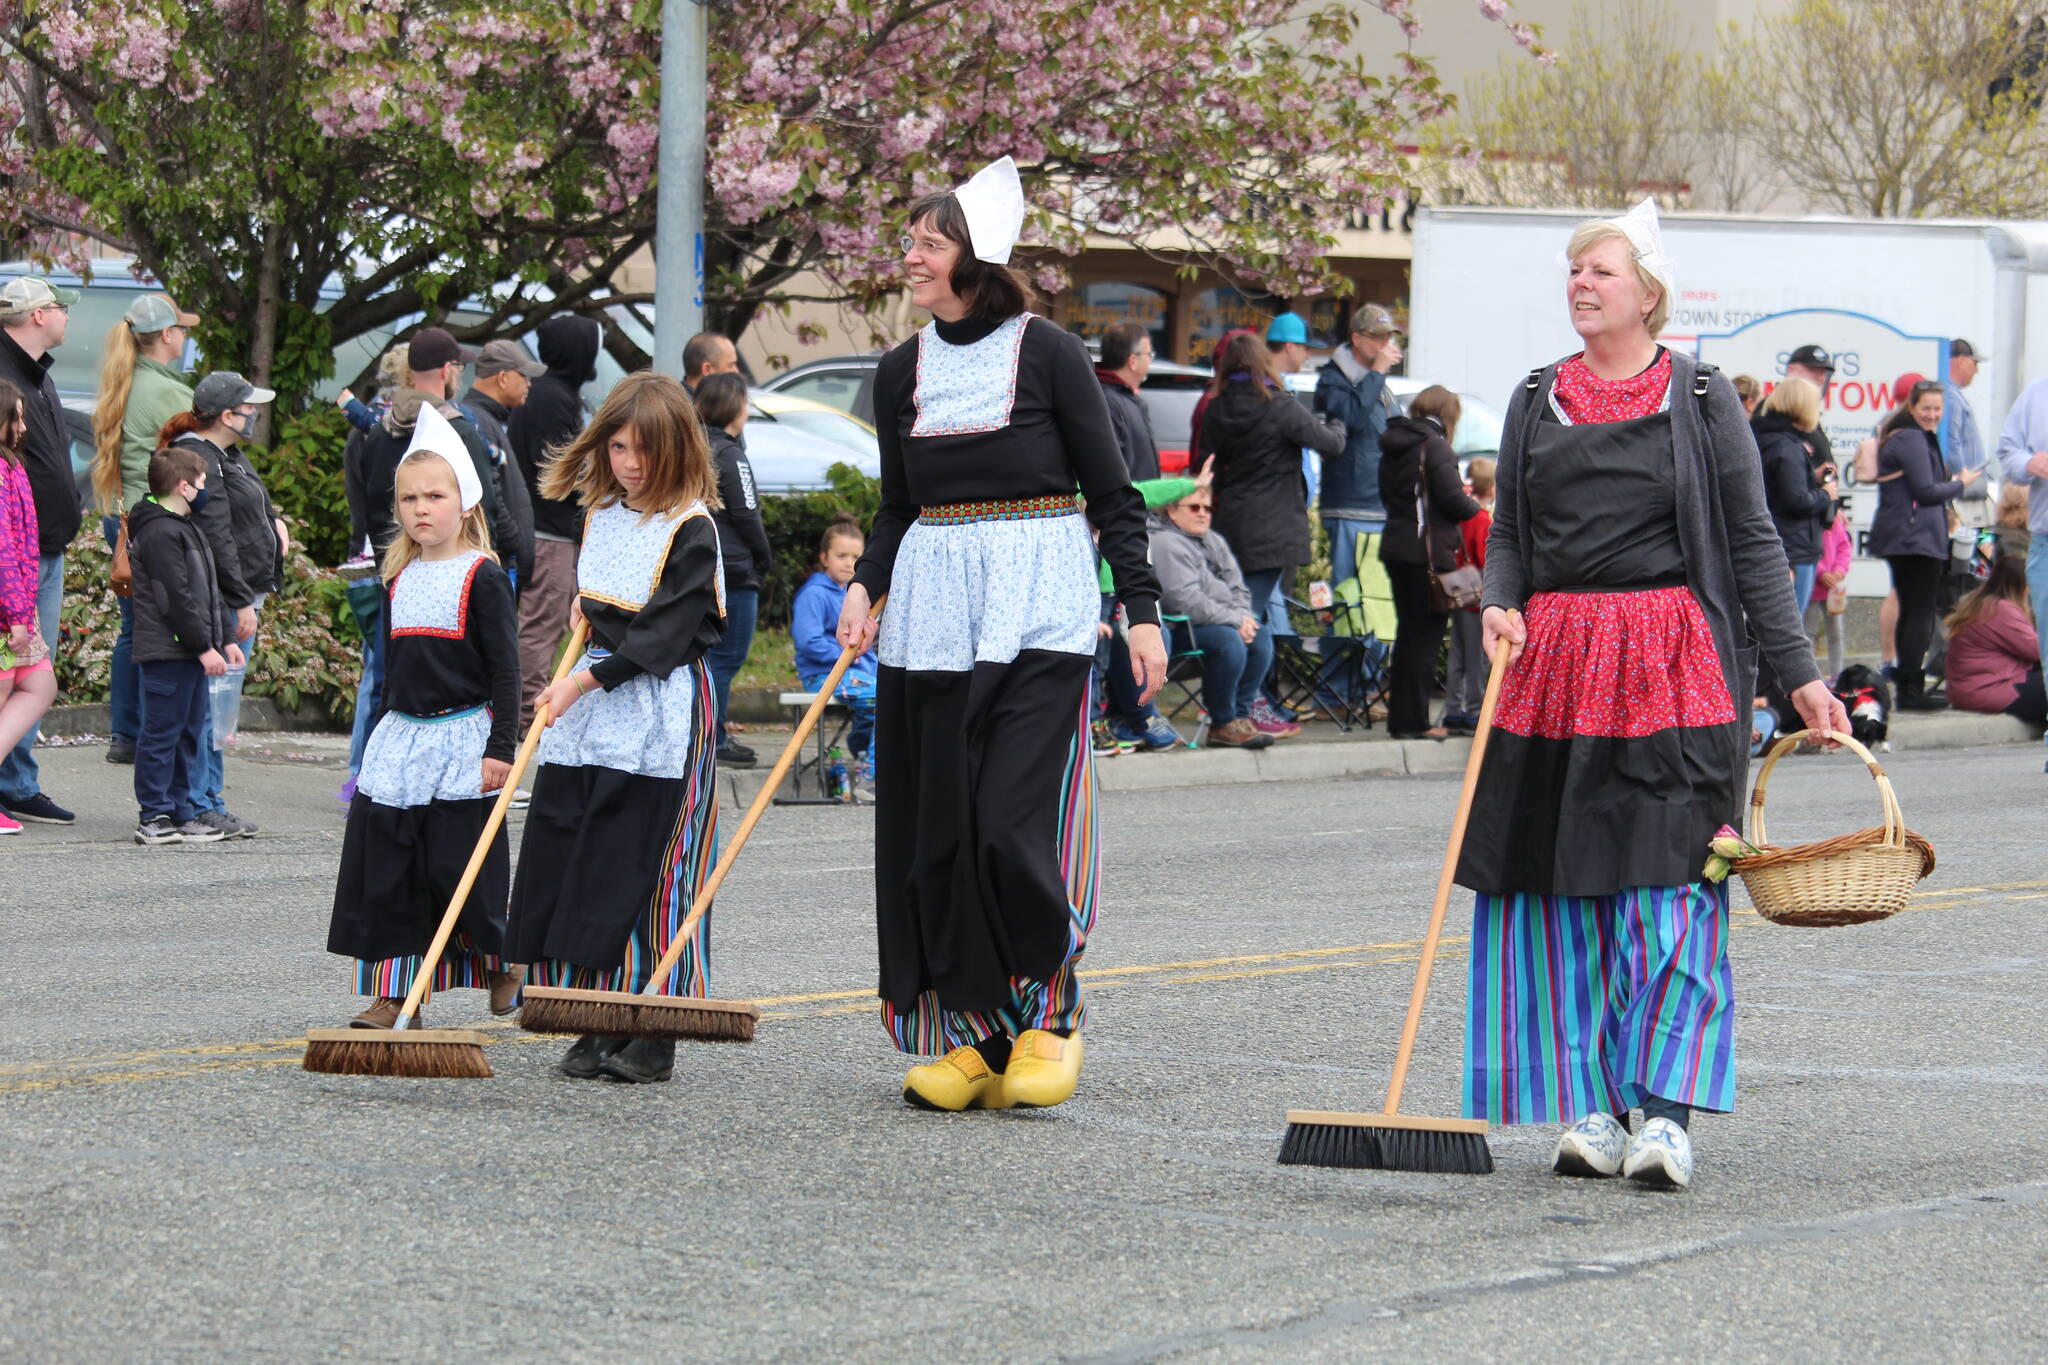 Street sweepers participate in the Holland Happening parade. (Photo by Karina Andrew/Whidbey News-Times)